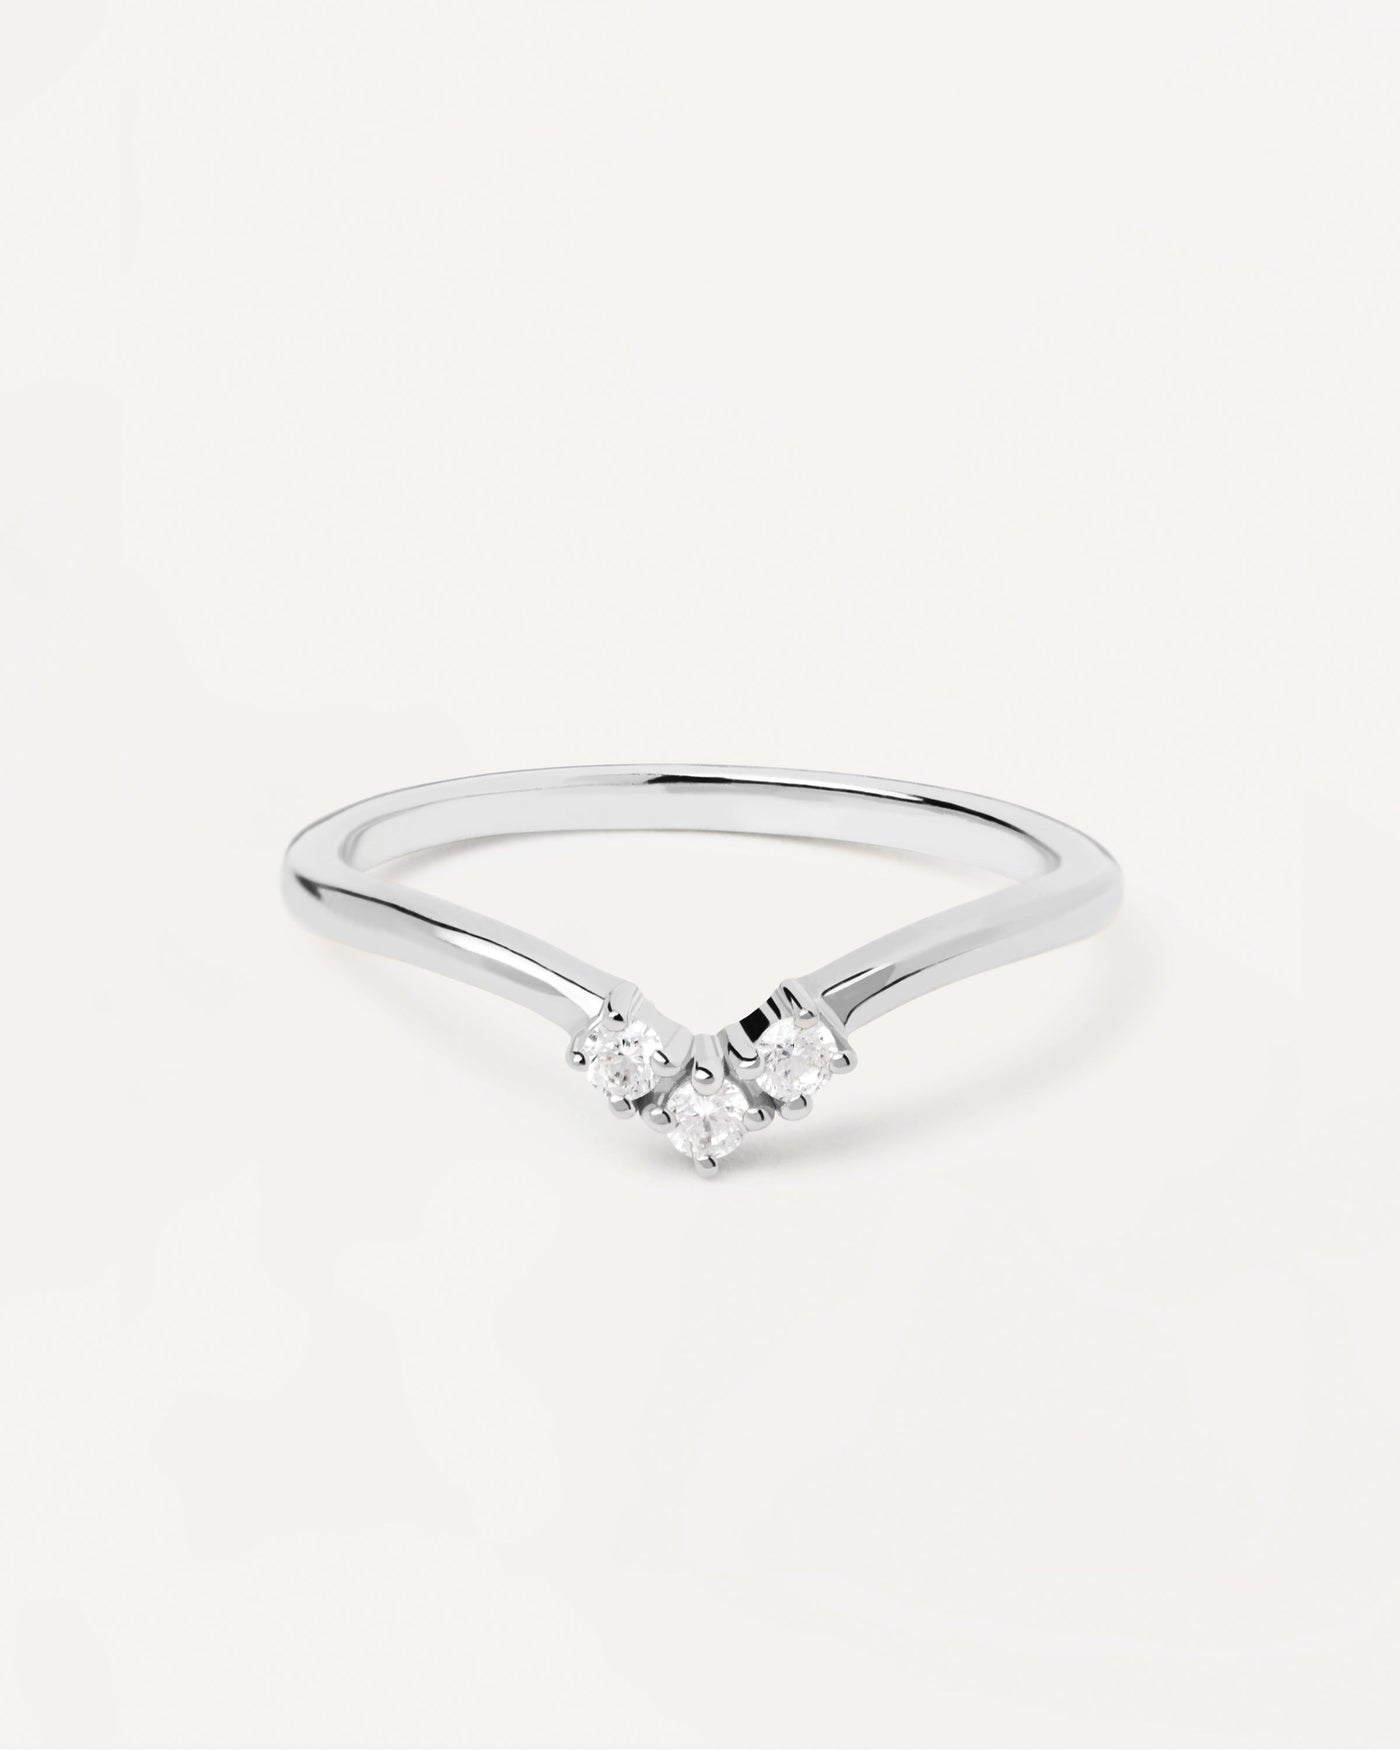 2023 Selection | Mini Crown Silver Ring. Dainty silver ring with 3-zirconia in triangle shape. Get the latest arrival from PDPAOLA. Place your order safely and get this Best Seller. Free Shipping.